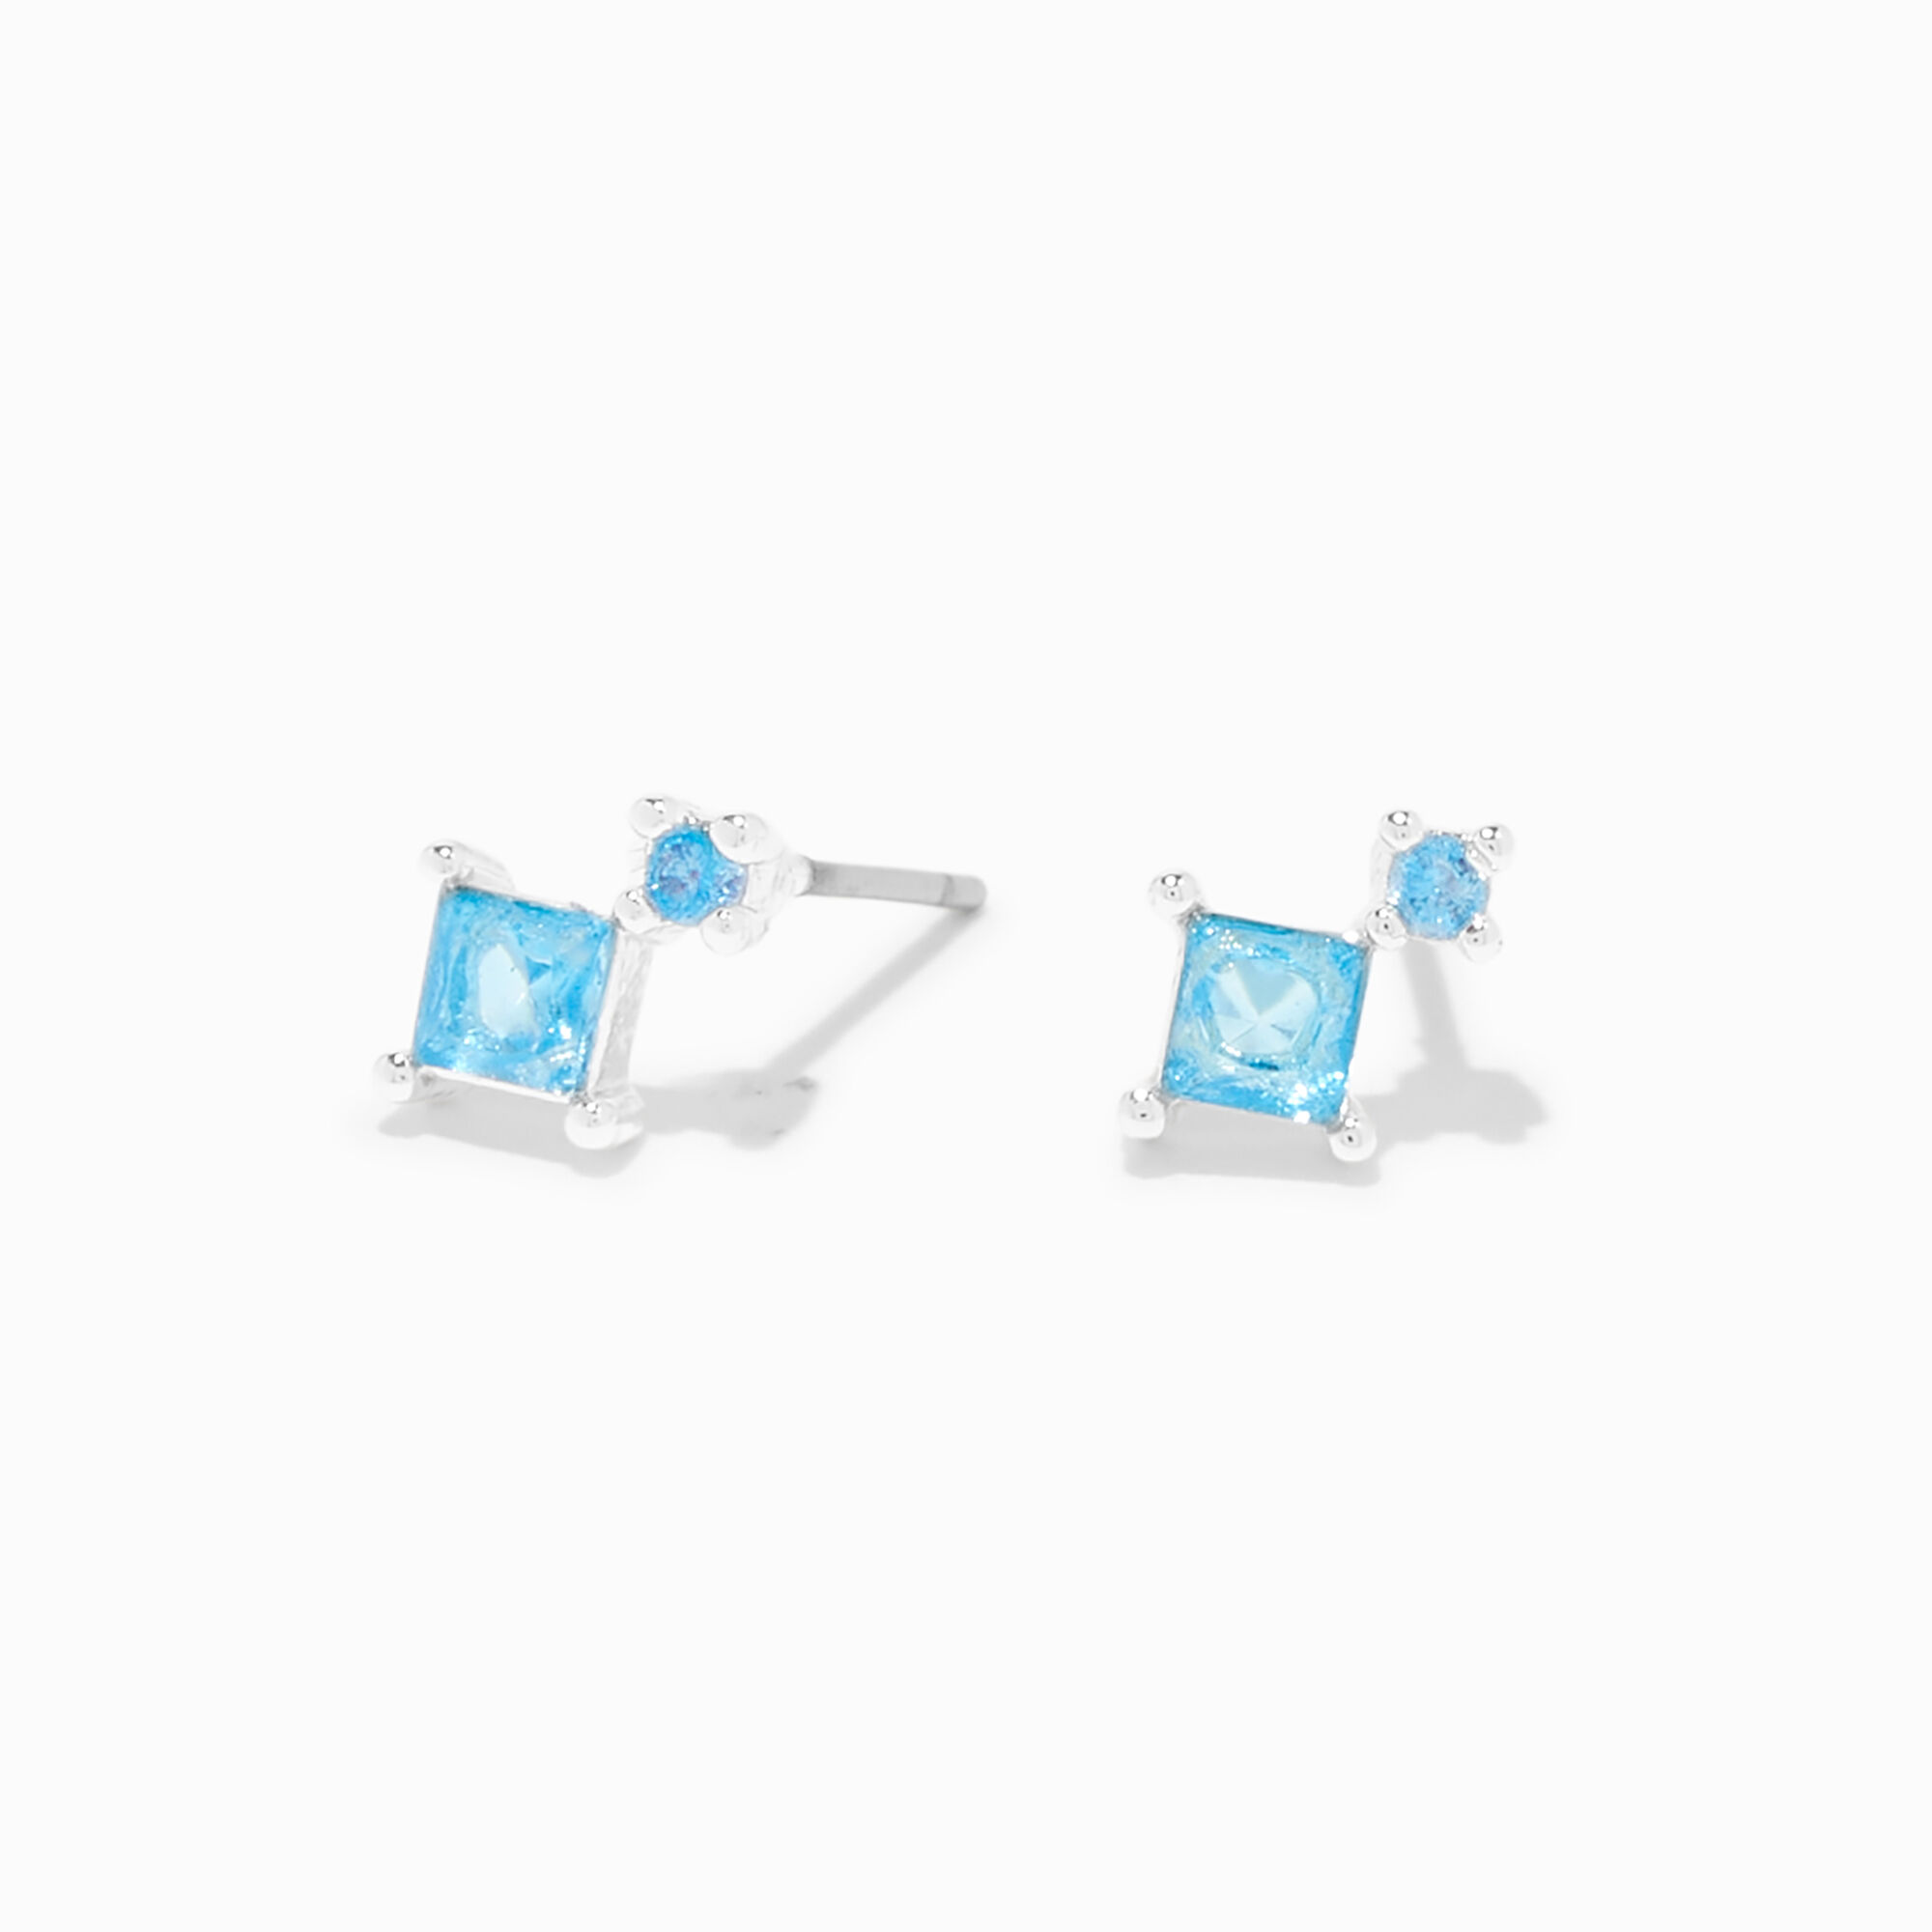 View Claires Aqua 5MM Cubic Zirconia Geometric Stud Earrings Silver information